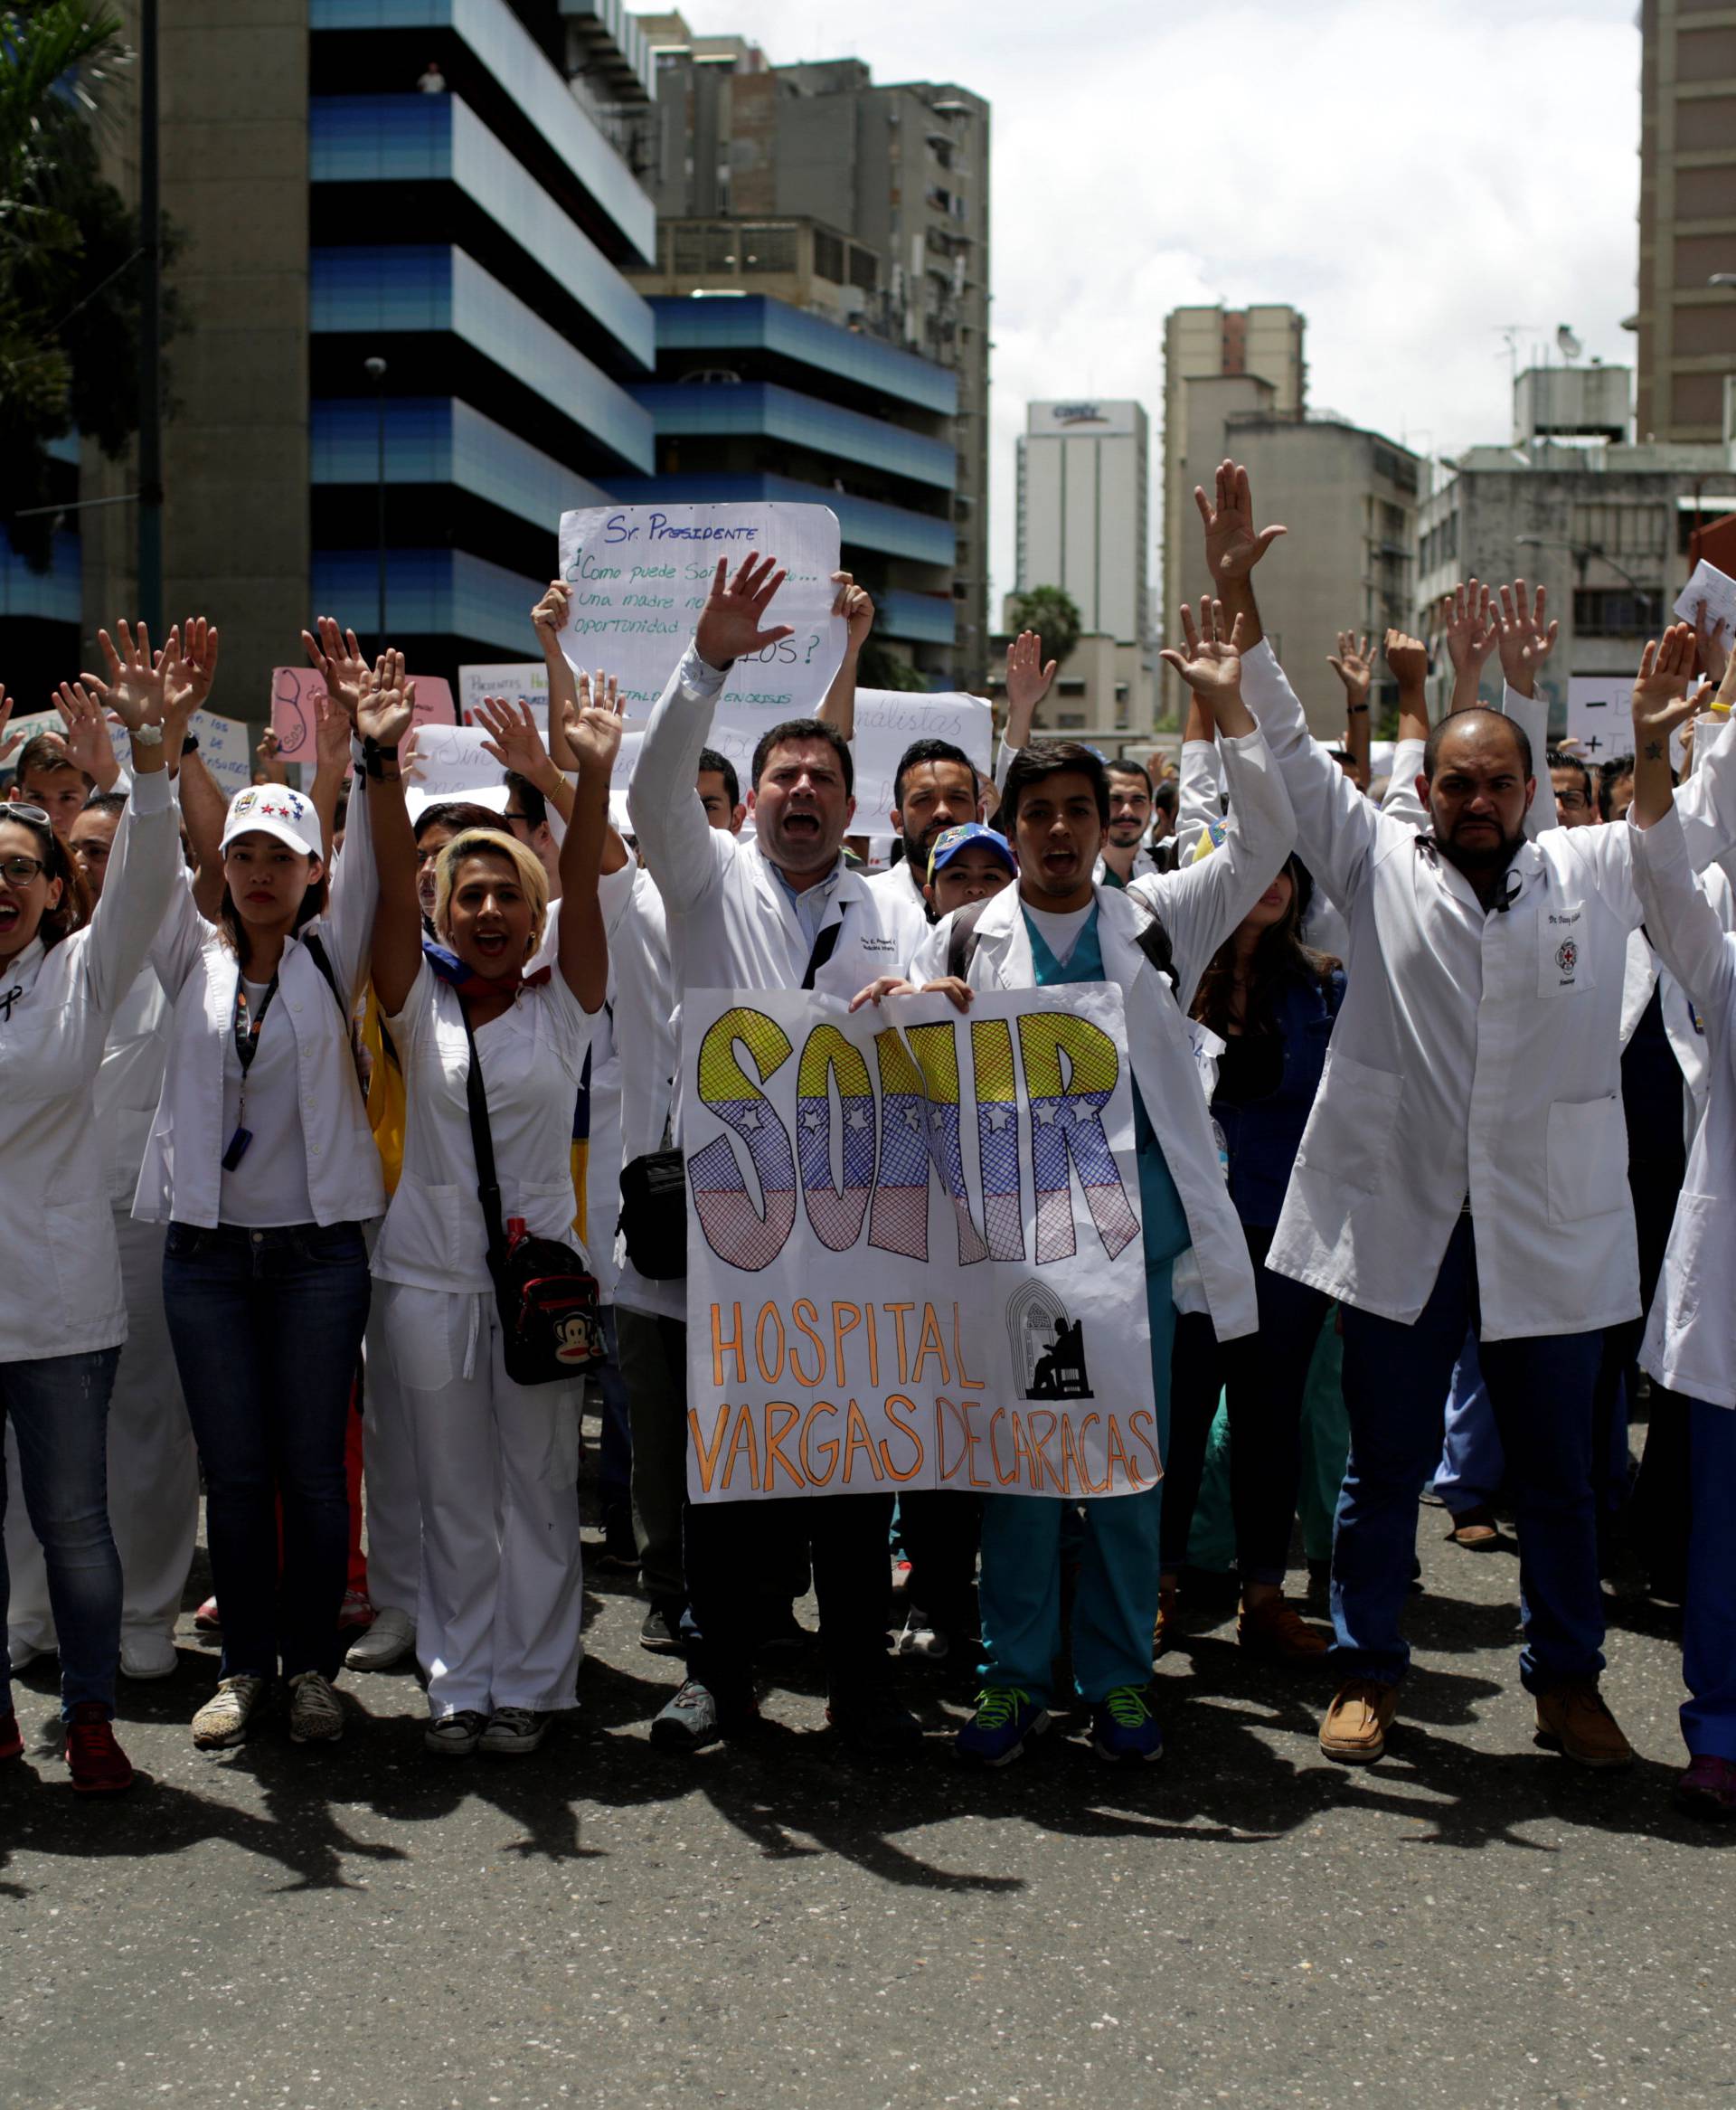 Workers of the health sector and opposition supporters take part in a protest against President Nicolas Maduro's government in Caracas